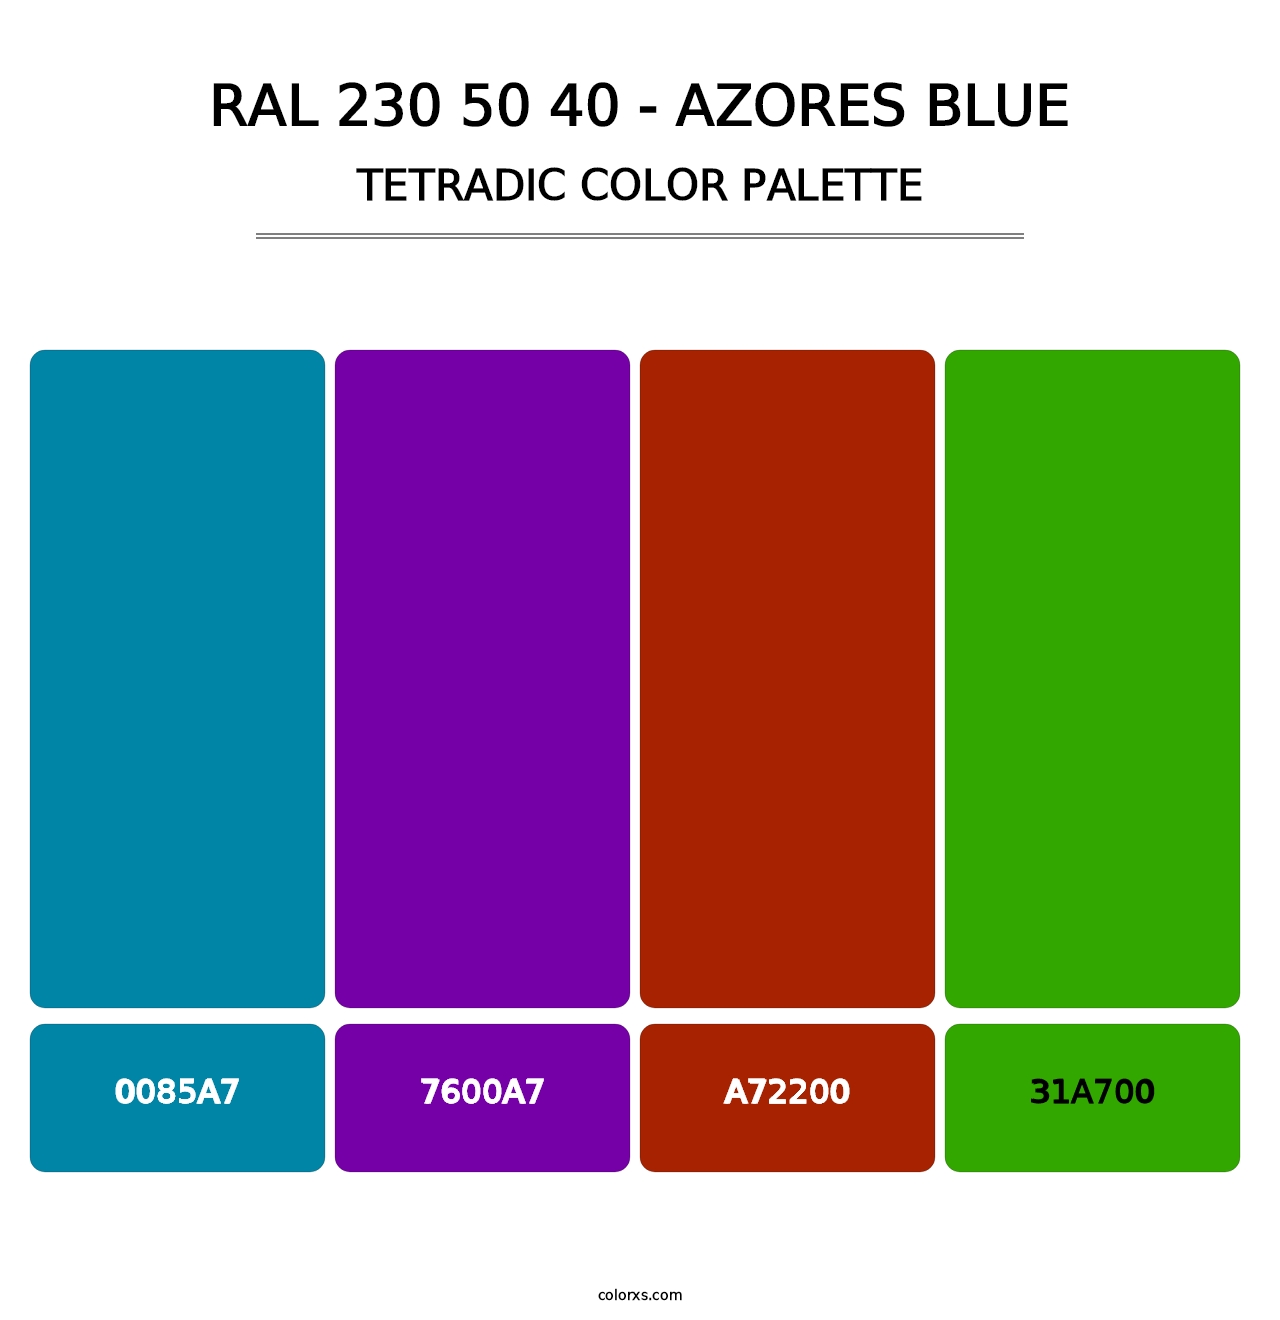 RAL 230 50 40 - Azores Blue - Tetradic Color Palette